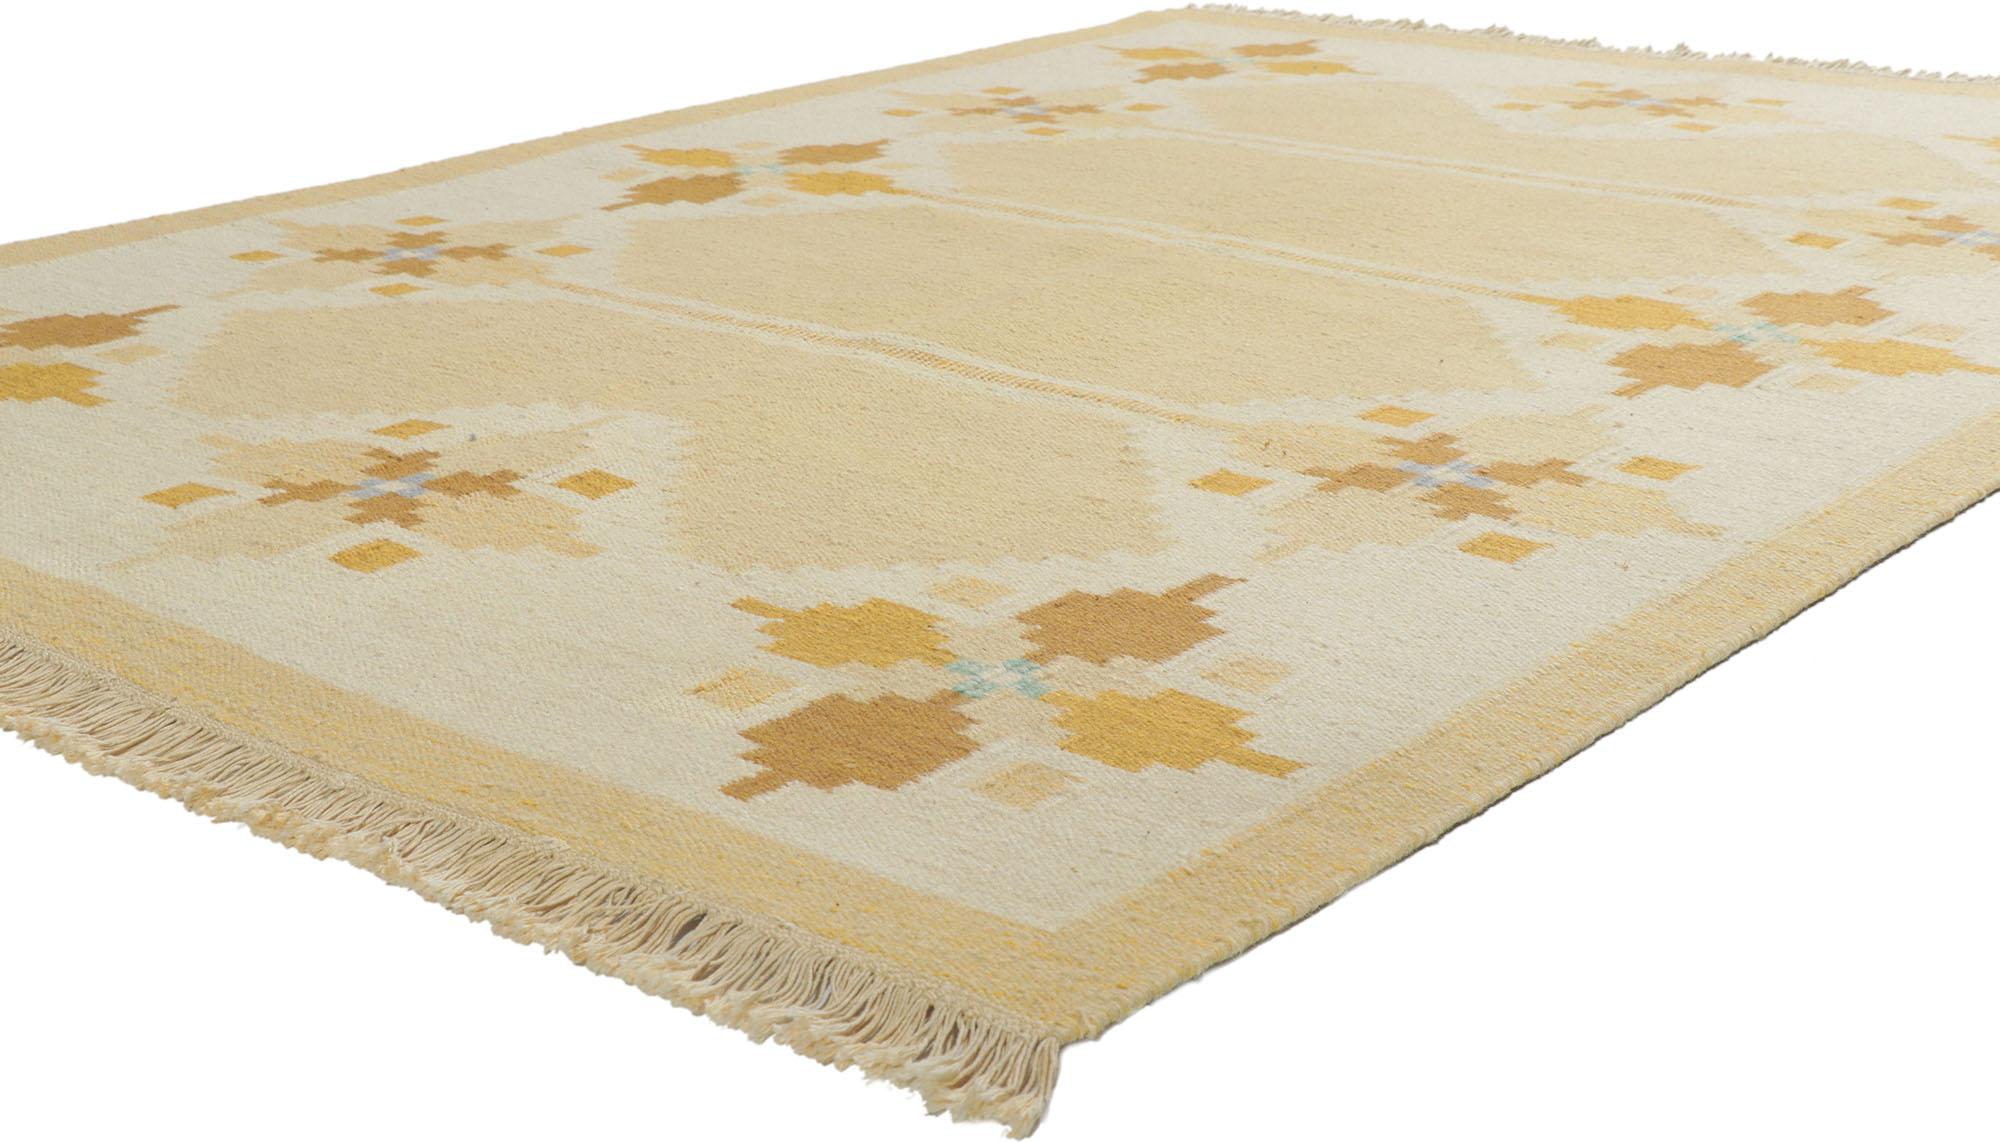 78251 Vintage Swedish Kilim Rollakan Rug with Scandinavian Modern Style 5'09 x 7'11. With its geometric design and bohemian hygge vibes, this hand-woven wool Swedish Kilim rug beautifully embodies the simplicity of Scandinavian modern style.